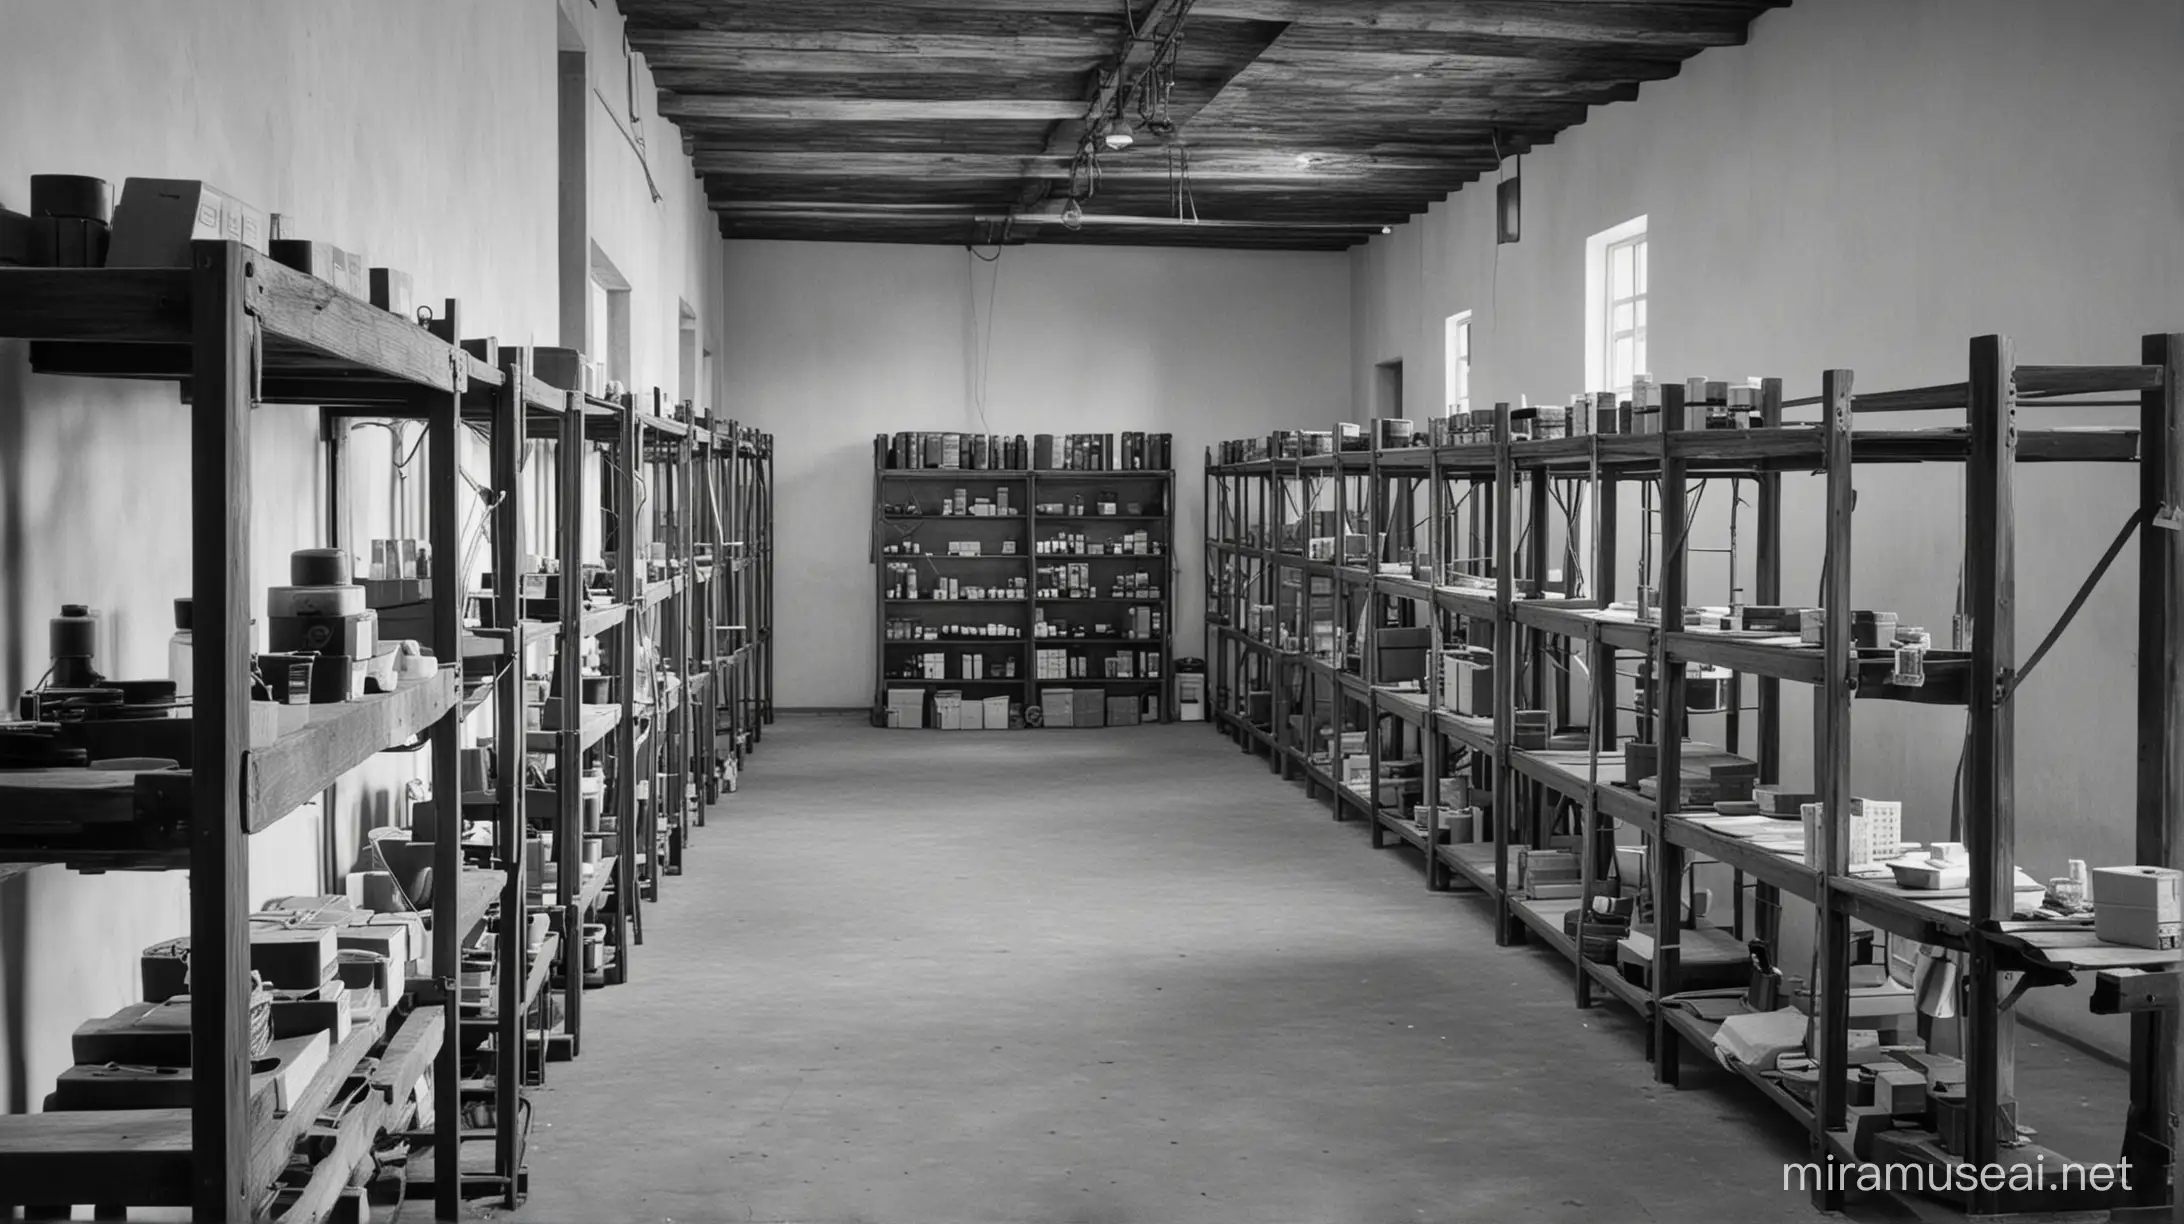 Medical Equipment Warehouse in Nazi Concentration Camp 1943 Historical Black and White Image